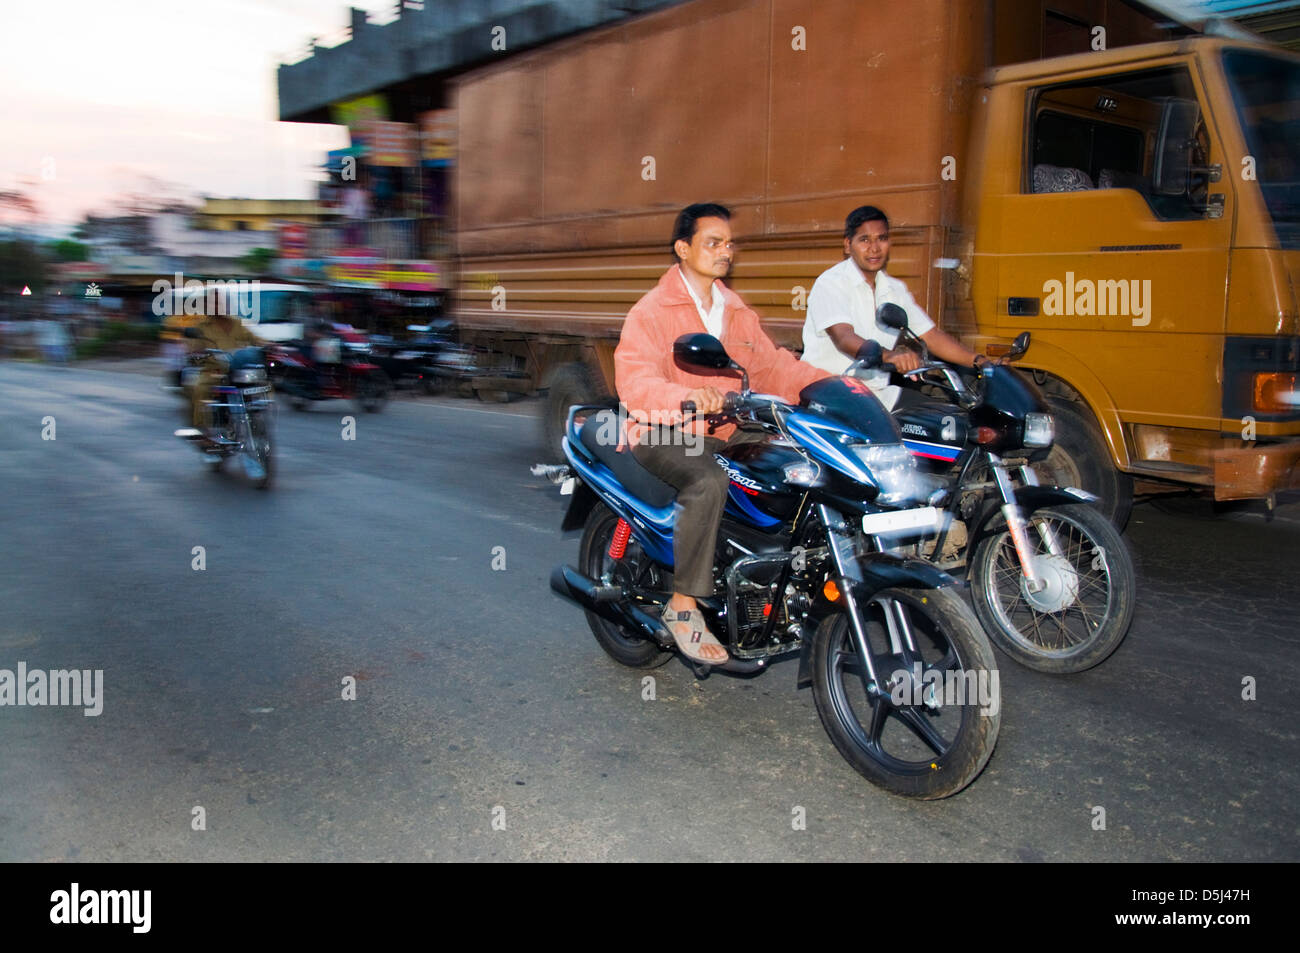 Indian men riding motorbikes without helmets Stock Photo